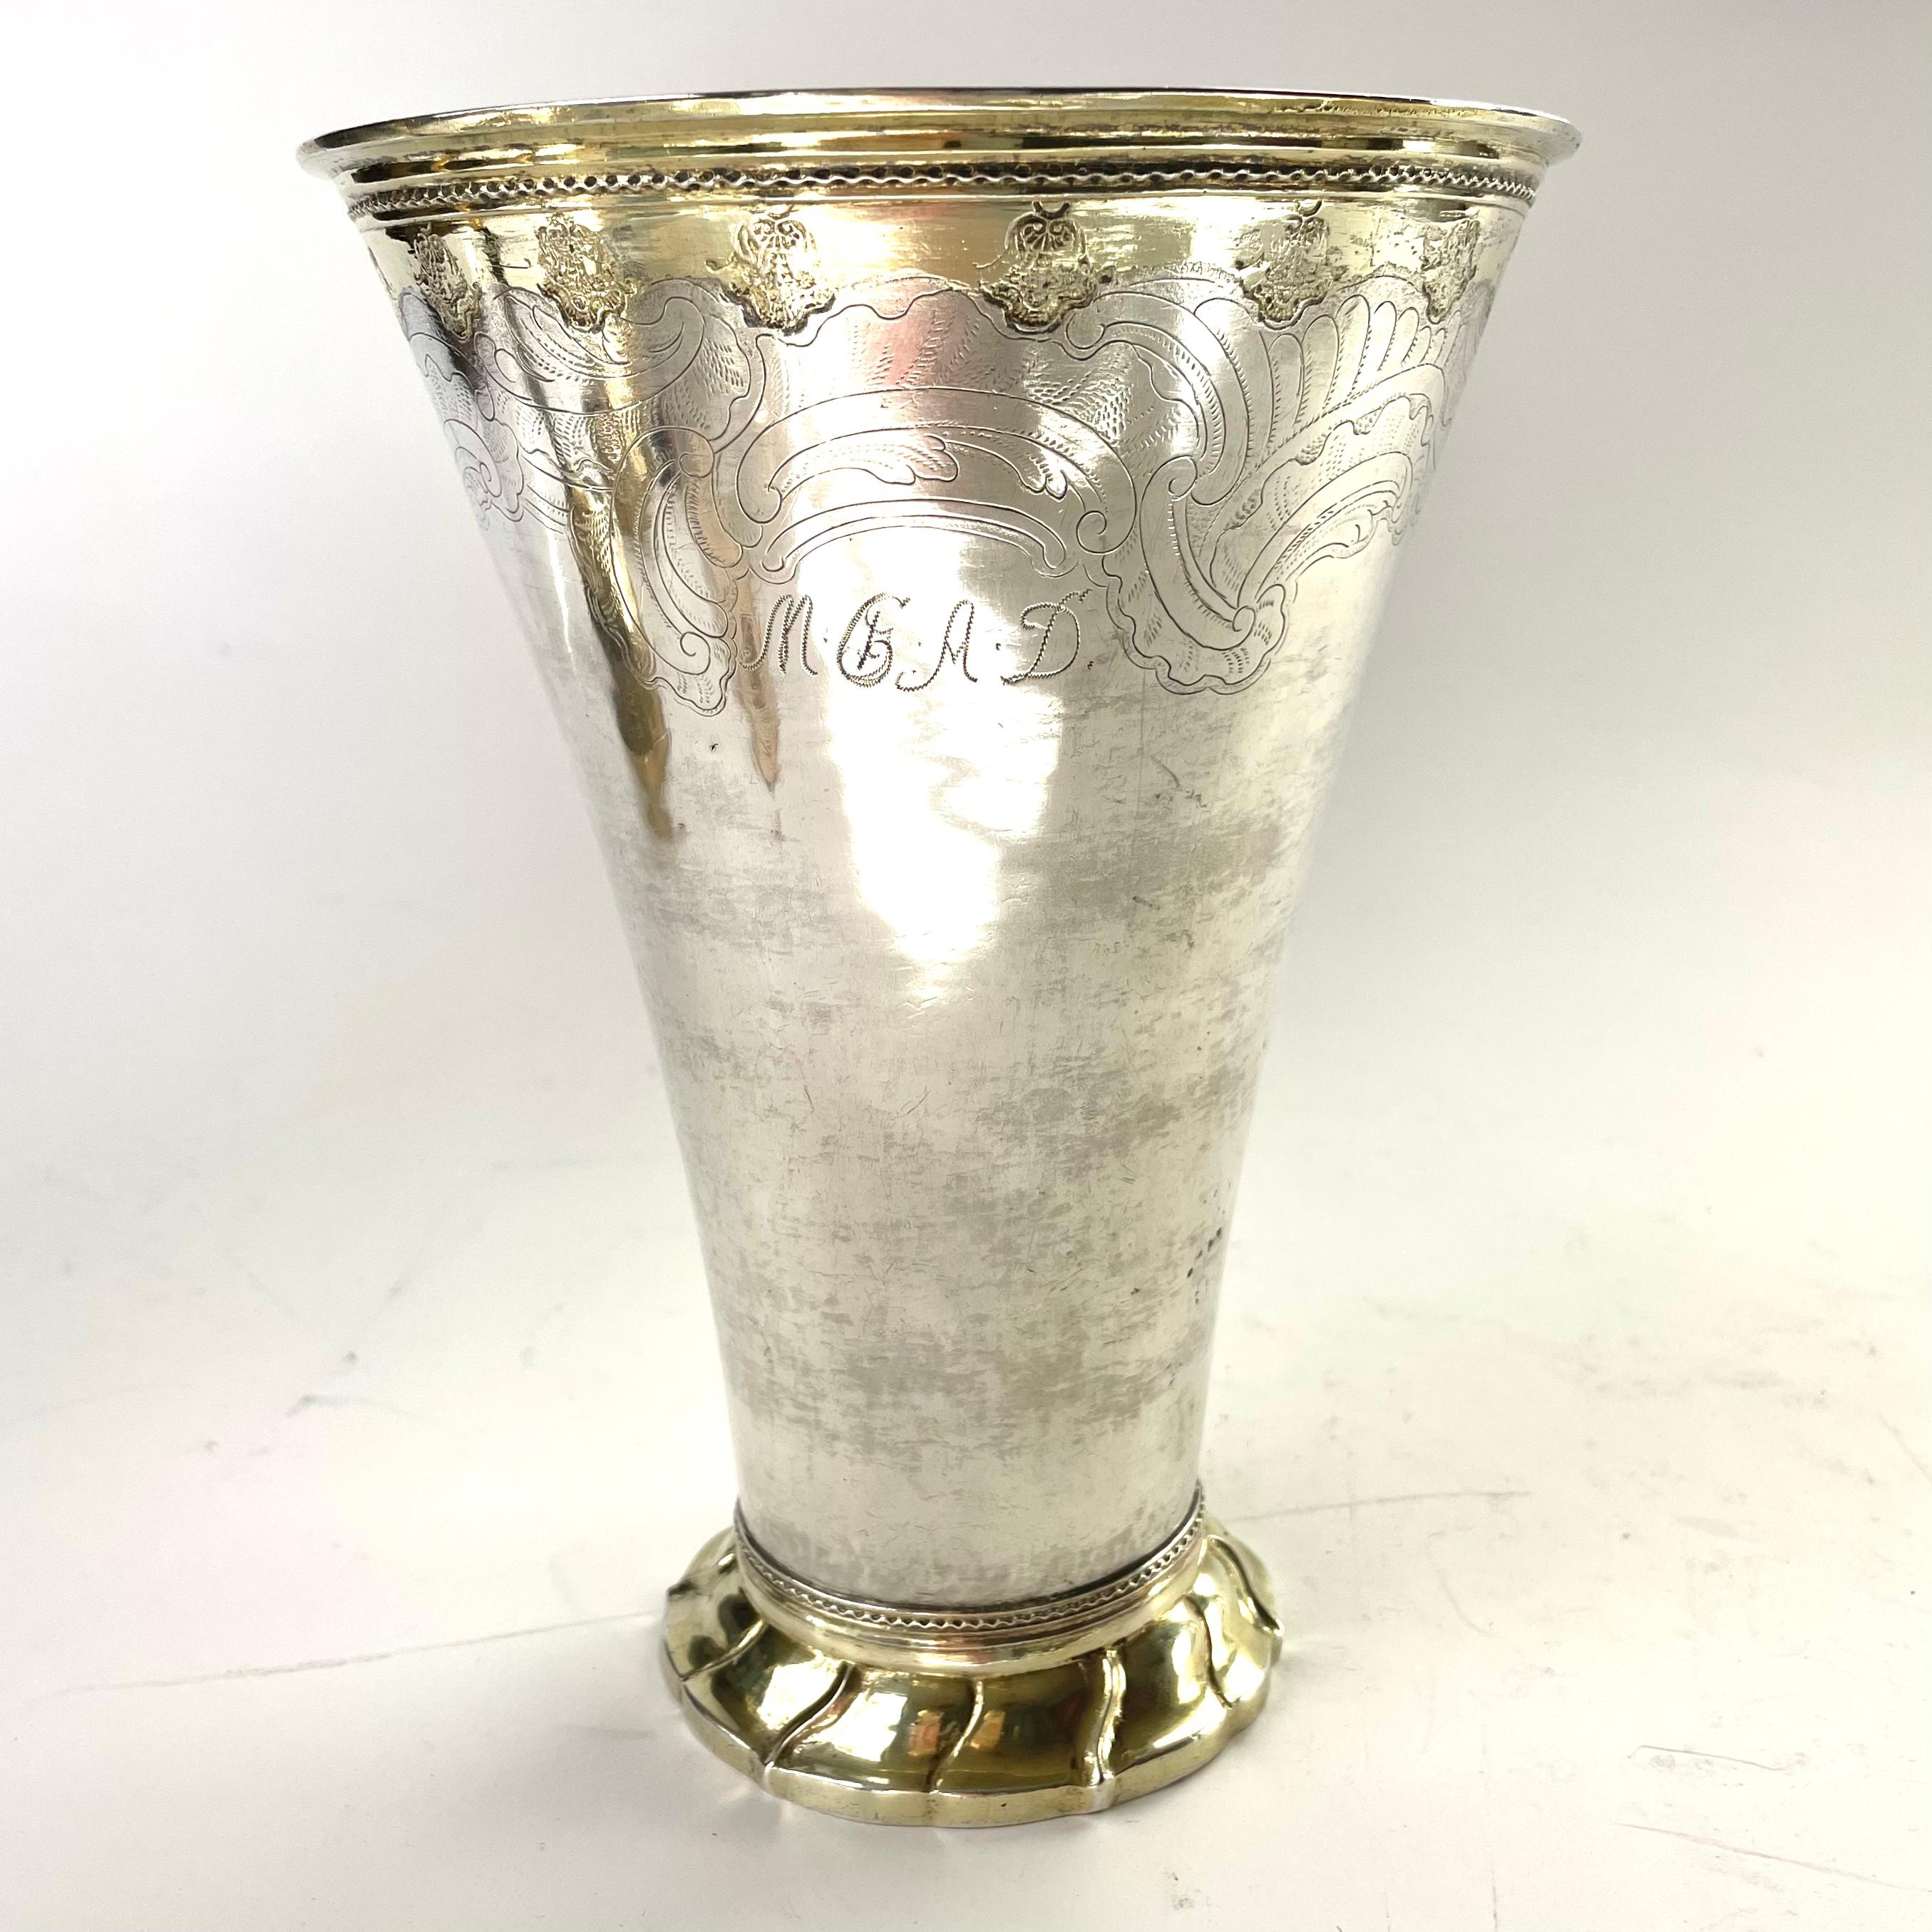 Elegant, rare and quite large Goblet in Silver, partly gilded in Swedish Rococo by Stephan Westerstråhle the elder, Västervik, Småland, Sweden dated 1765 (G-stamp). Two inscription from previous owners, one of which is in connection with a